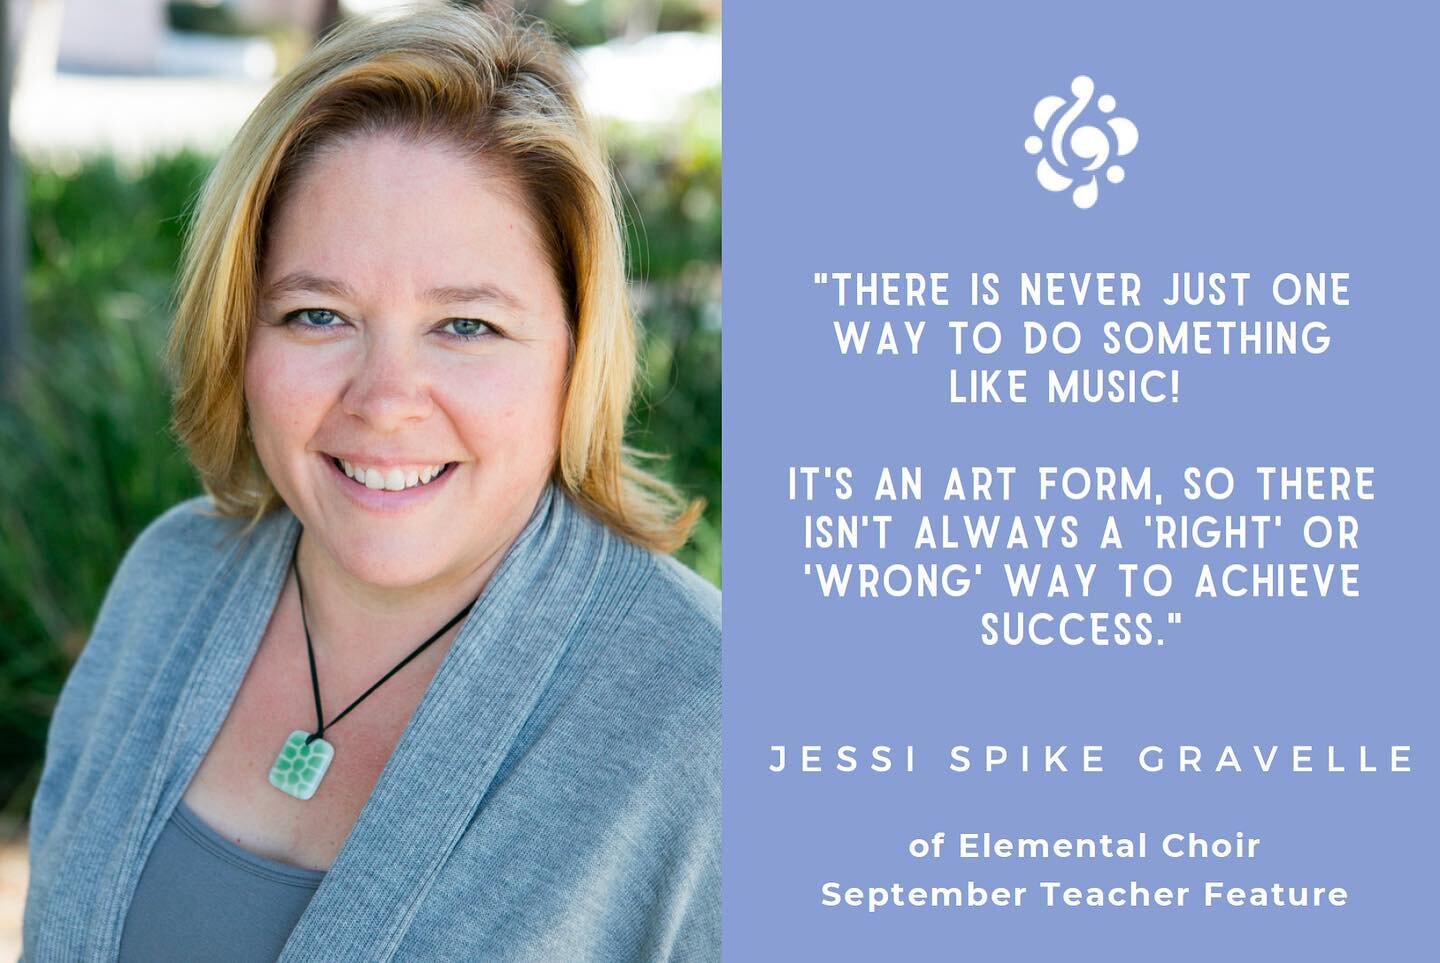 Our September Teacher Feature is Jessi Spike Gravelle, veteran SMMUSD teacher AND our beloved Elemental Choir Director! 🎶 We spoke with Jessi about how she started making music as a child, why she loves teaching in Santa Monica, and more!
.
P.S. the